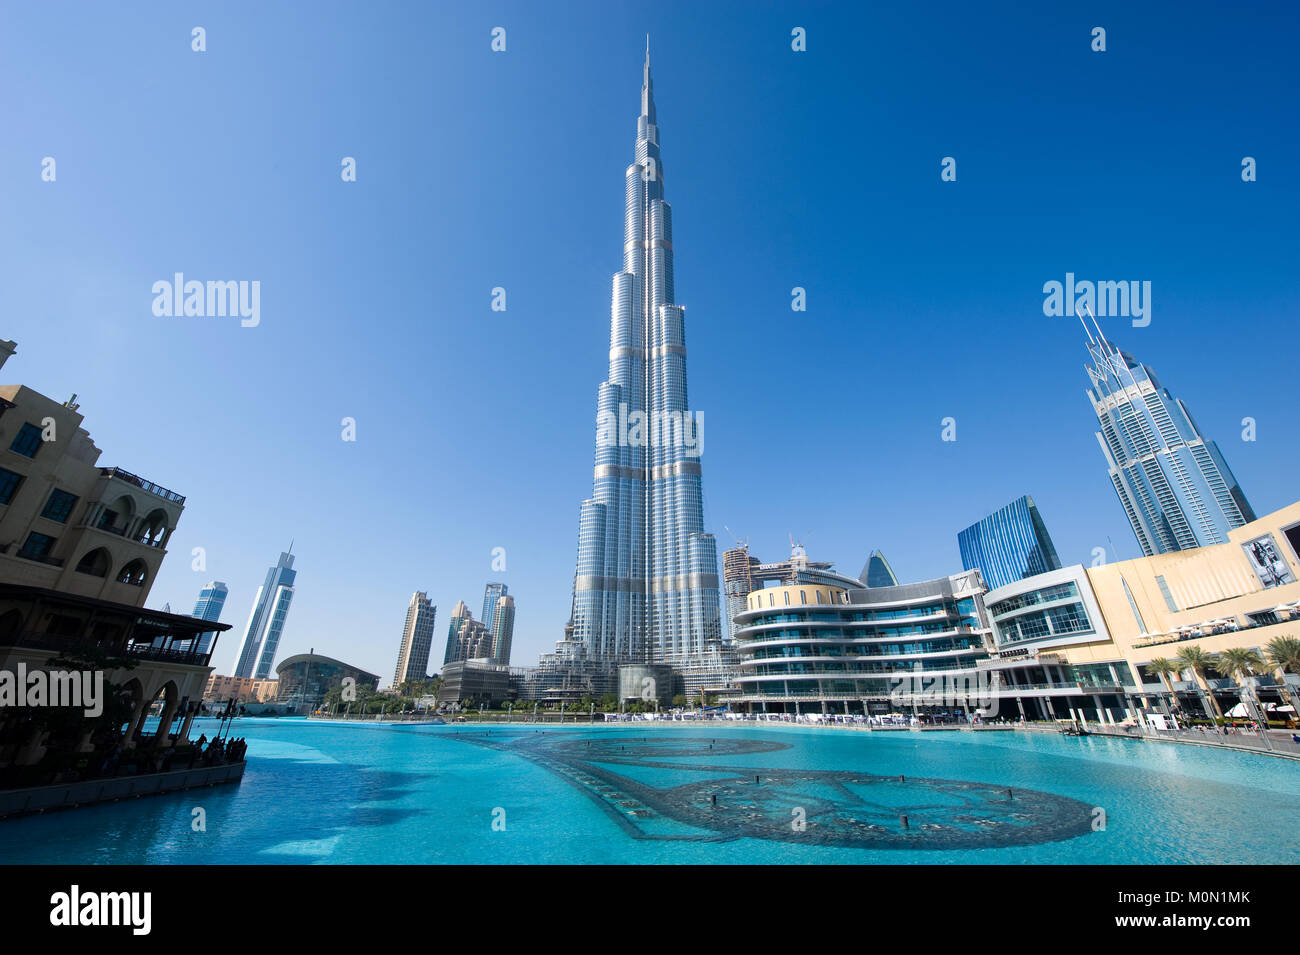 DUBAI, UNITED ARAB EMIRATES - JAN 02, 2018: The Burj Khalifa in the center of Dubai is the tallest building in the world with 828 meters high. Stock Photo